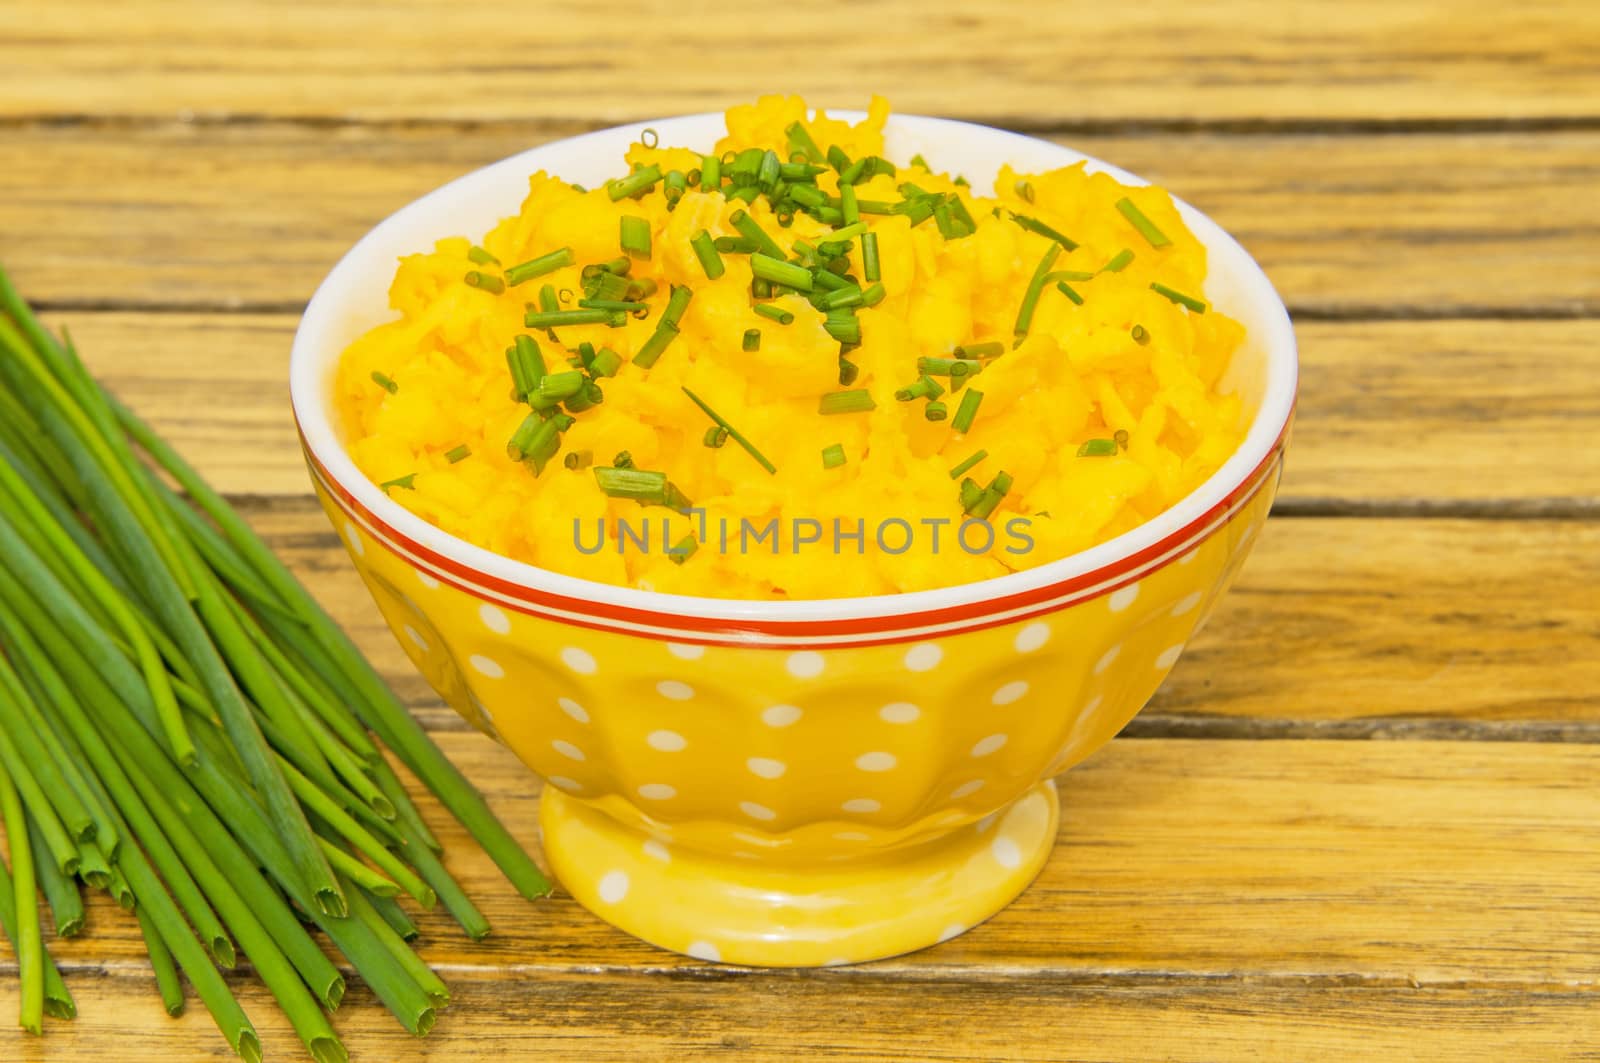 Scrambled eggs with chives in a yellow bowl on a wooden table